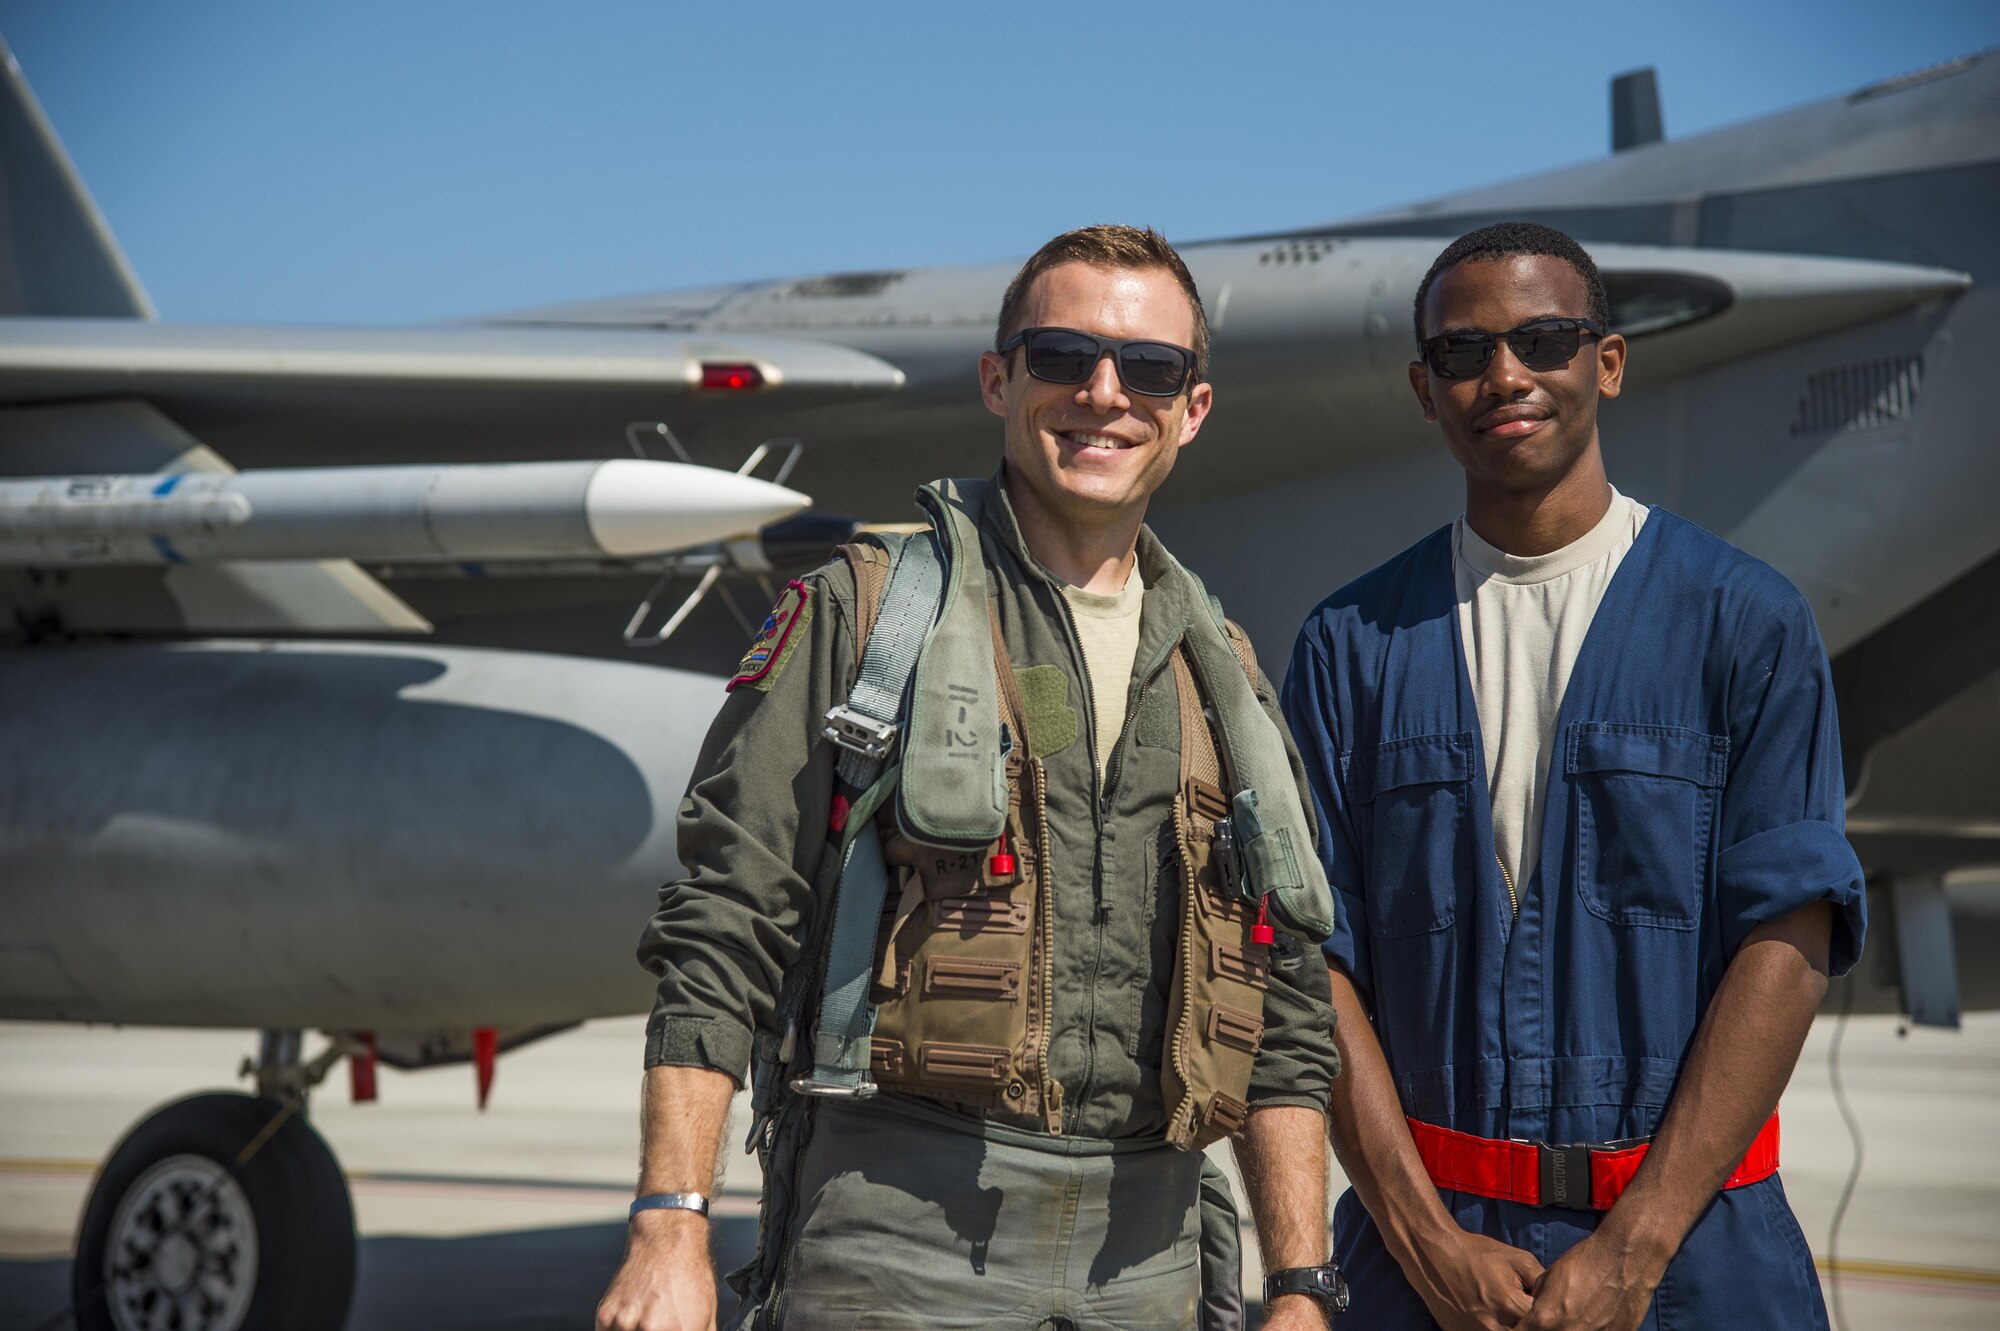 U.S. Air Force Capt. David Kuhn, left, a 67th Fighter Squadron F-15C Eagle pilot, and Senior Airman Devin Ross, right, an 18th Aircraft Maintenance Squadron crew chief, pause for a photo prior to flight at Misawa Air Base, Japan, June 13, 2017. Pilots and maintainers from Kadena AB, Japan, relocated to Misawa AB, due to its strategic location, ensuring contingency operations for airframes and units forward deployed across the Indo-Asia-Pacific region. (U.S. Air Force photo by Staff Sgt. Deana Heitzman)